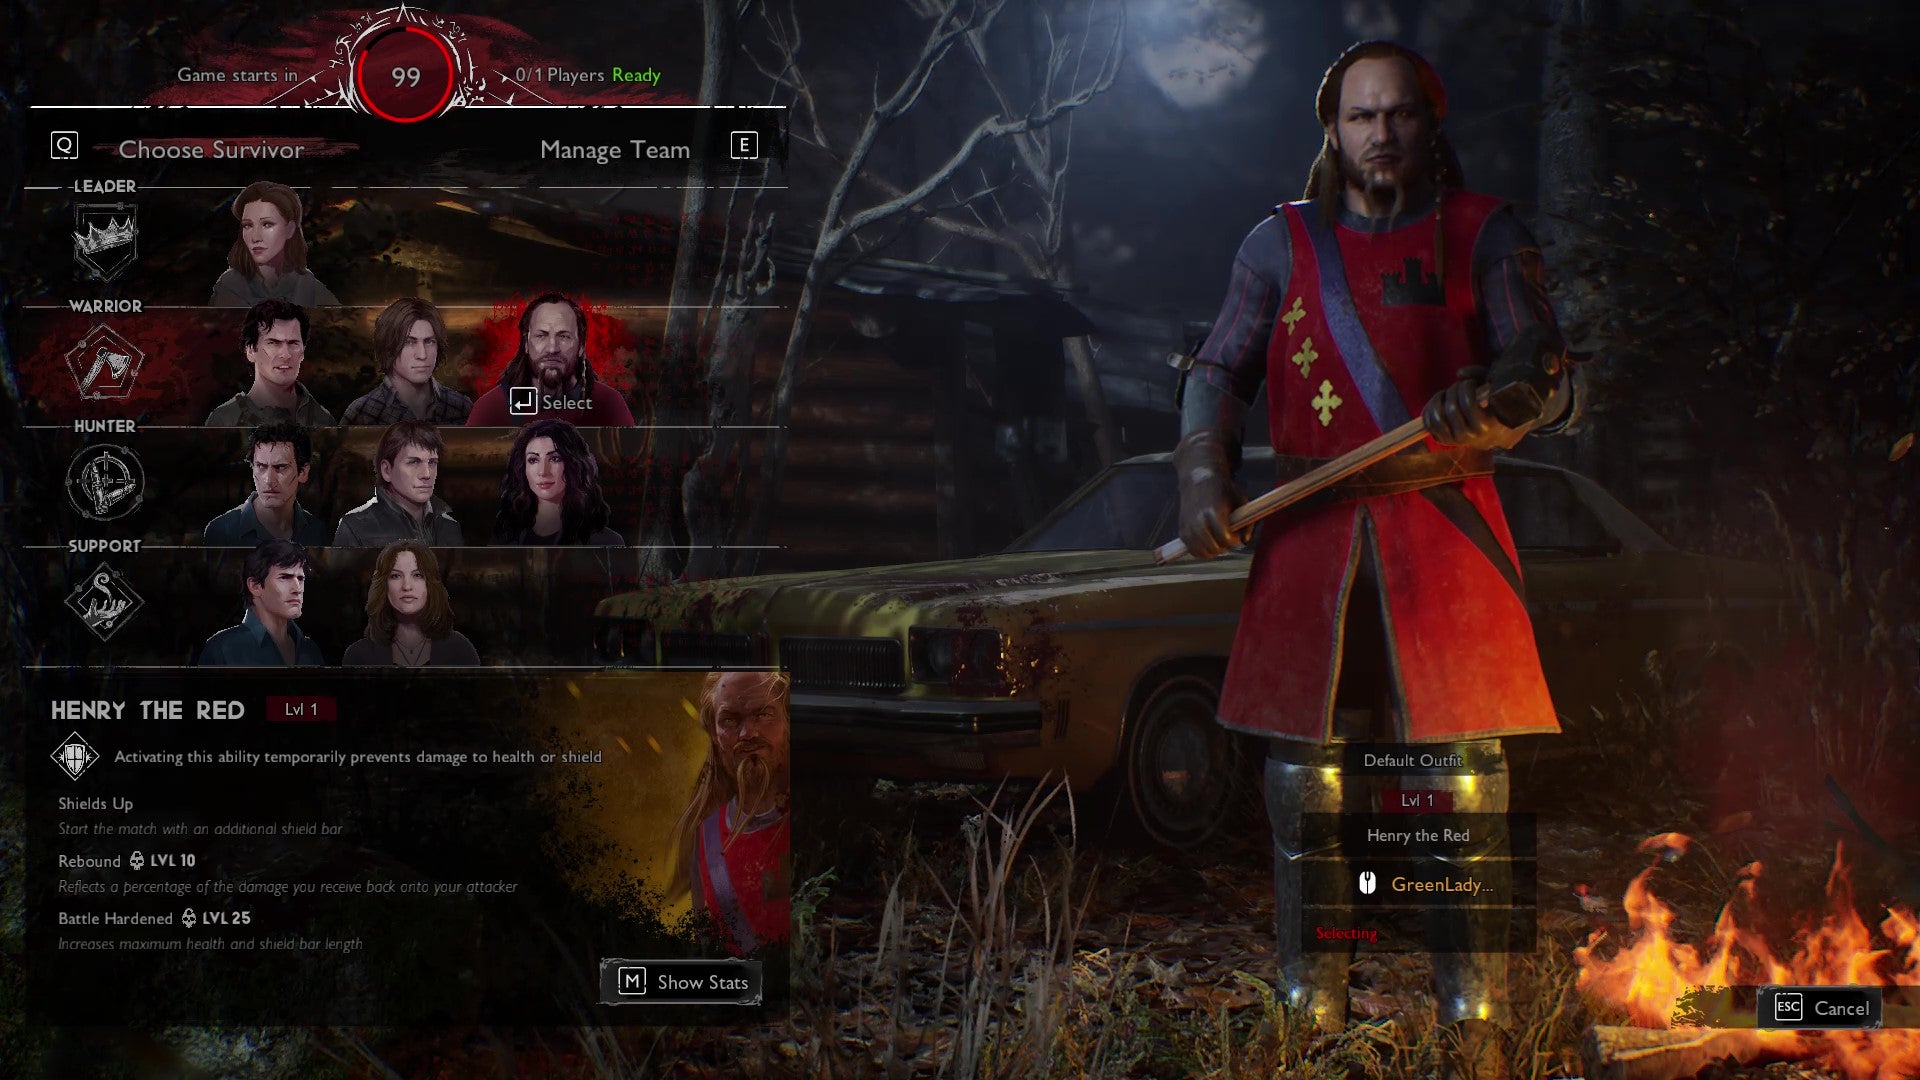 The player selection screen from Evil Dead: The Game, with Henry the Red selected by a Survivor player.